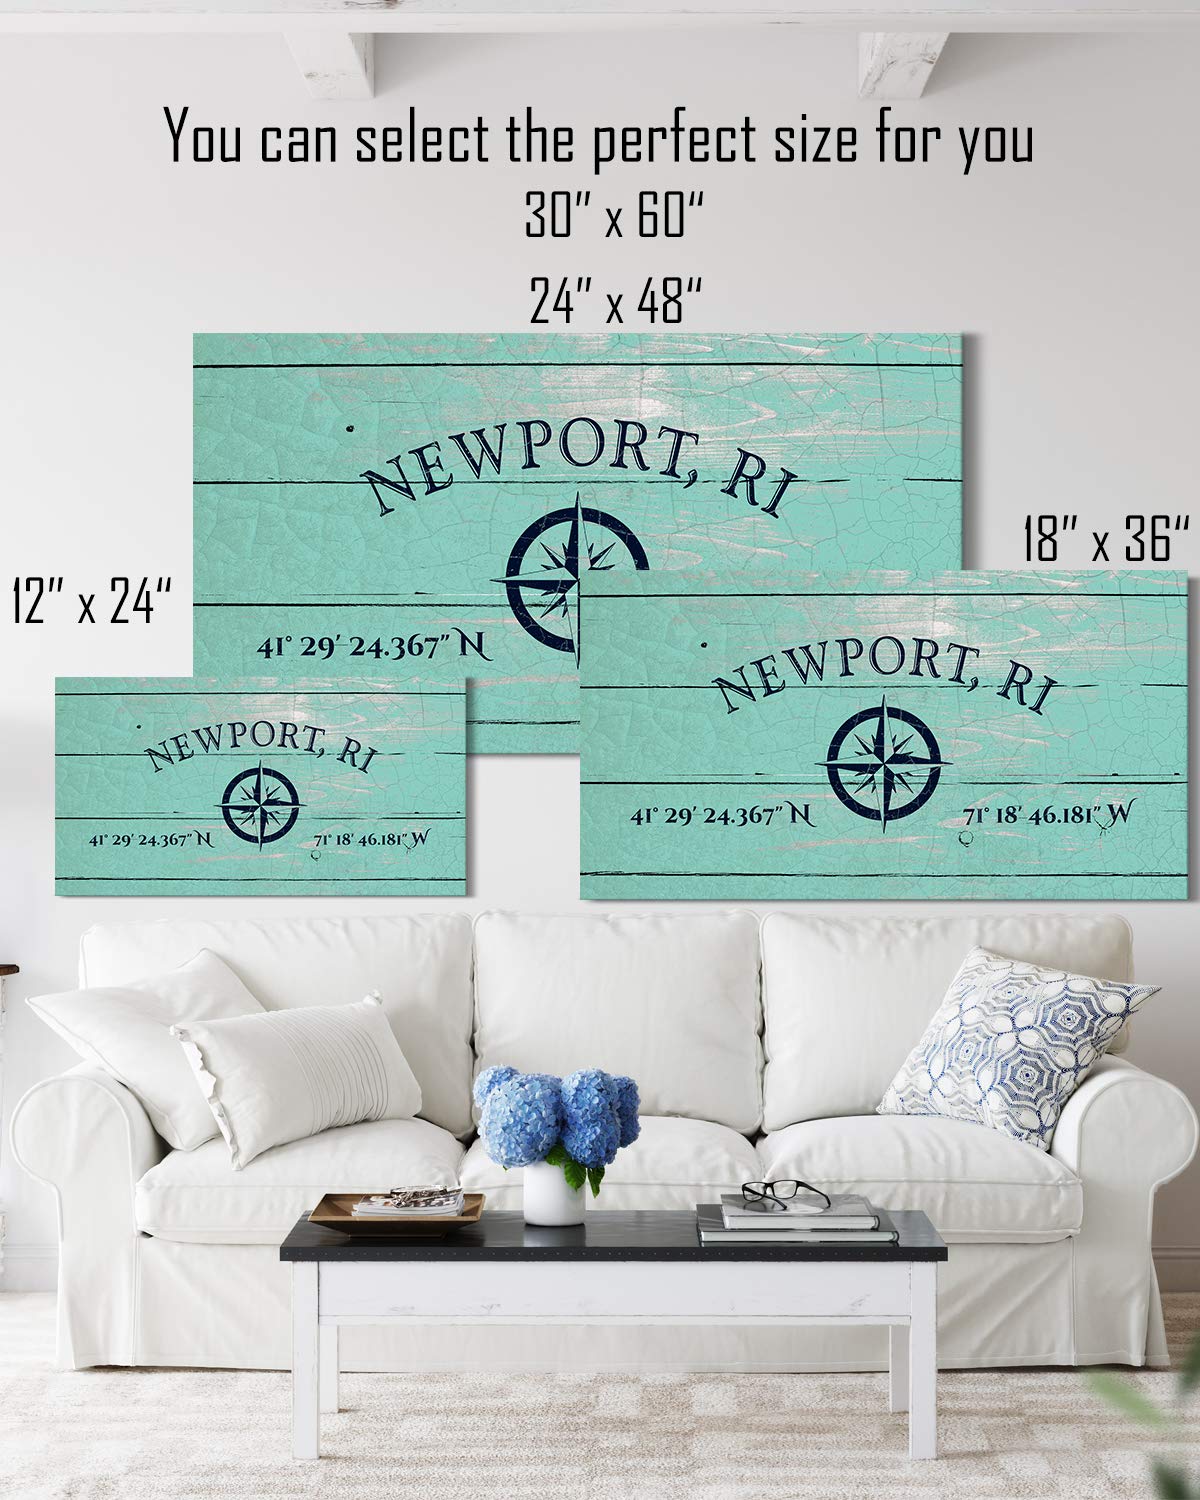 Newport, RI 41° 29' 24.367" N, 71° 18' 46.181" W - Wall Decor Art Canvas with a distressed light turquoise woodgrain background - Ready to Hang - Great for above a couch, table, bed or more